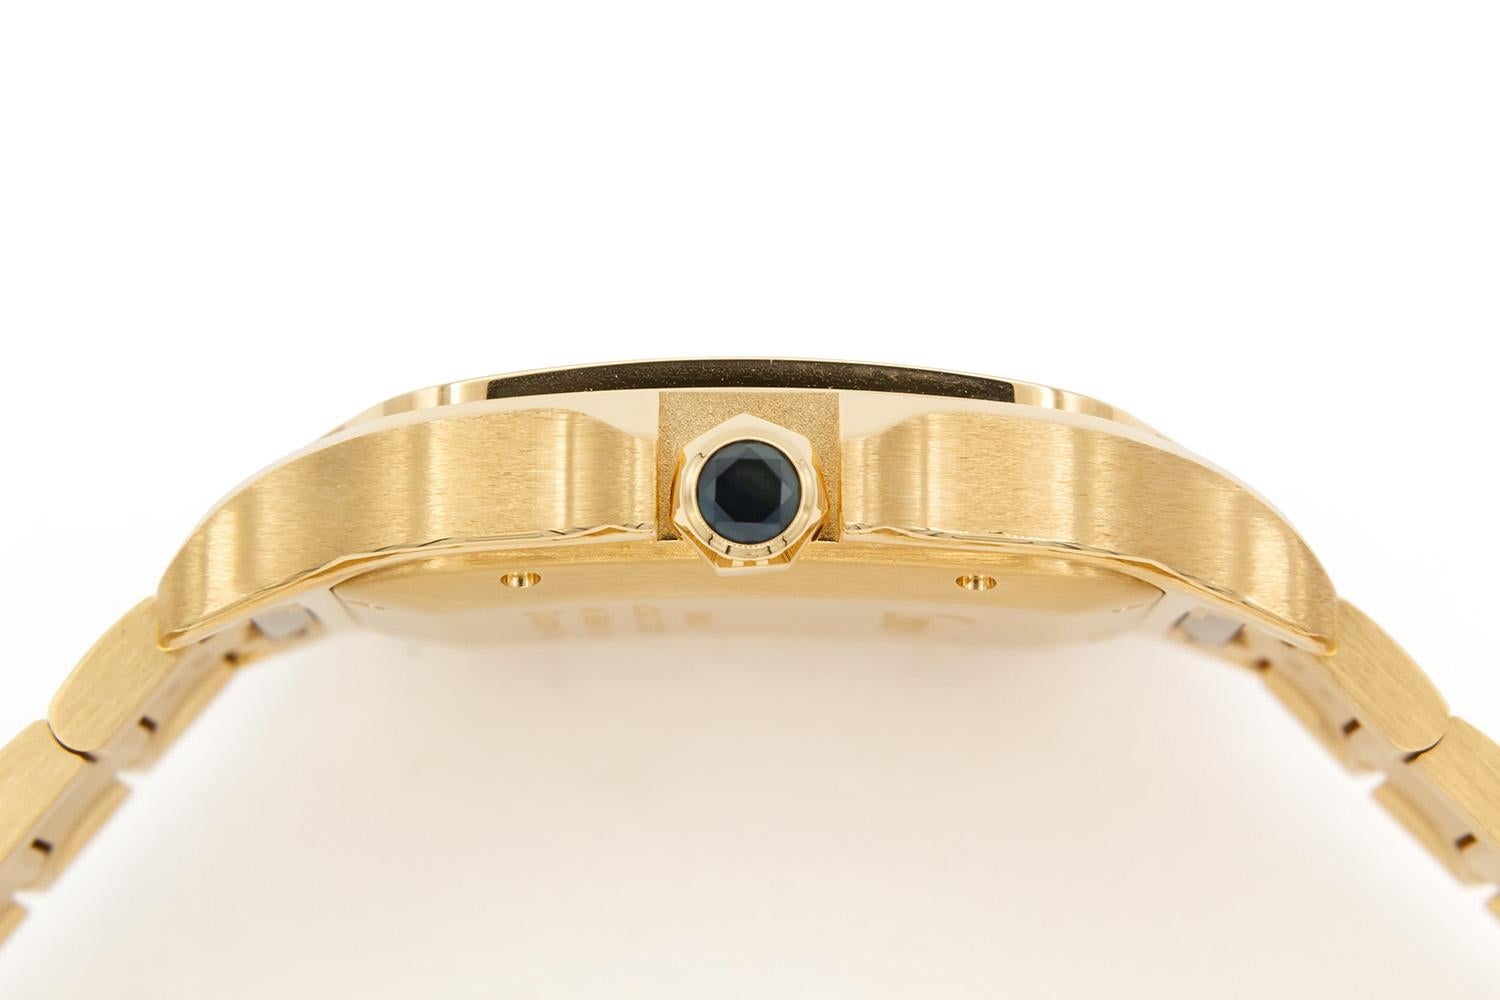 2023 Cartier Santos De Cartier Watch Large 18K Solid Gold WGSA0029 BNP In New Condition For Sale In Tustin, CA